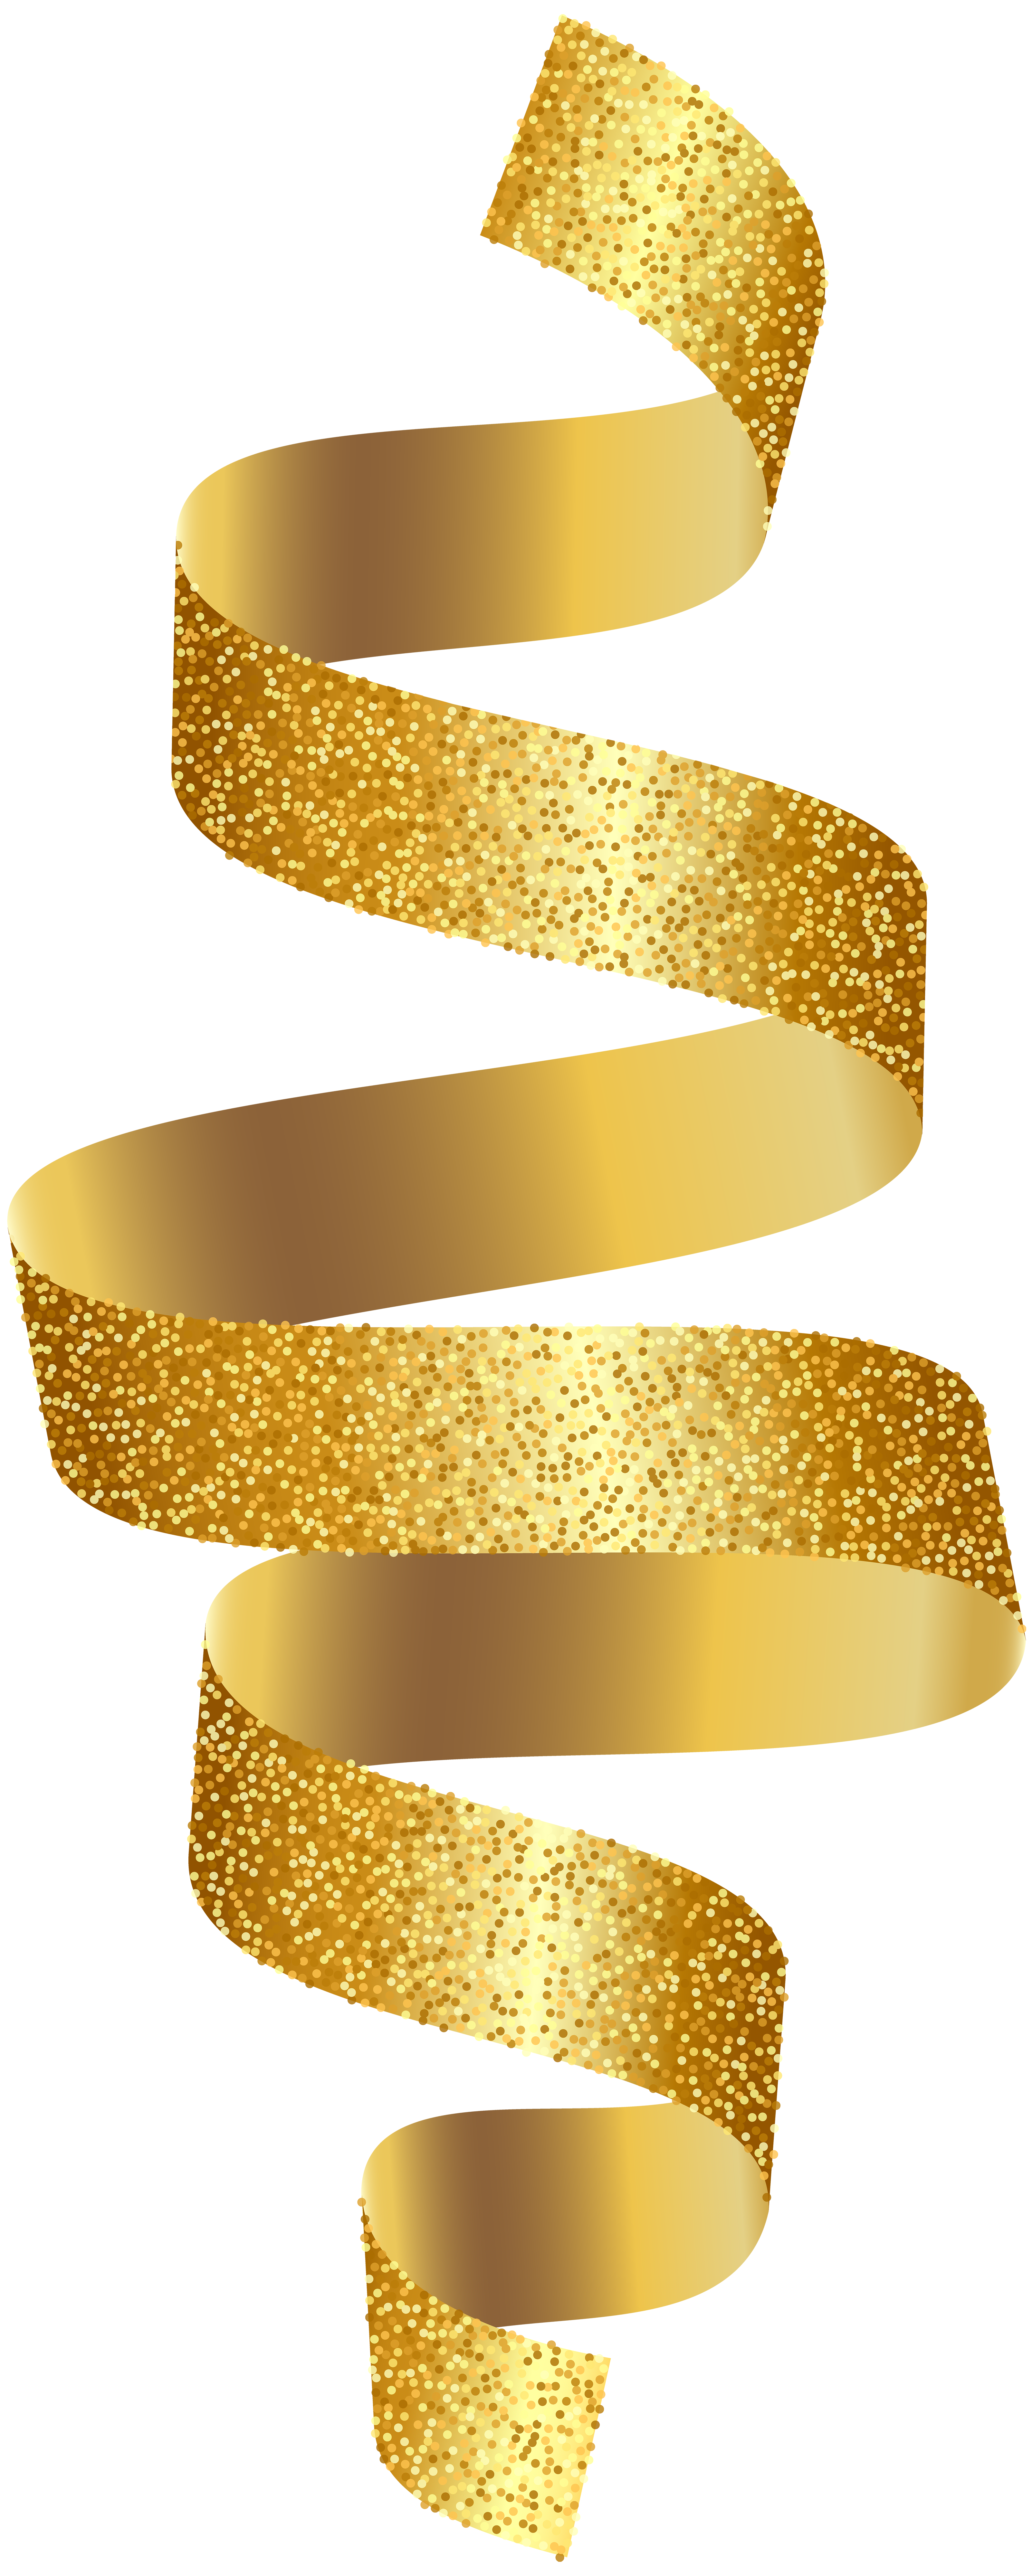 Gold Ribbon Png Transparent Clip Art Image Gallery Yopriceville High Quality Images And Transparent Png Free Clipart